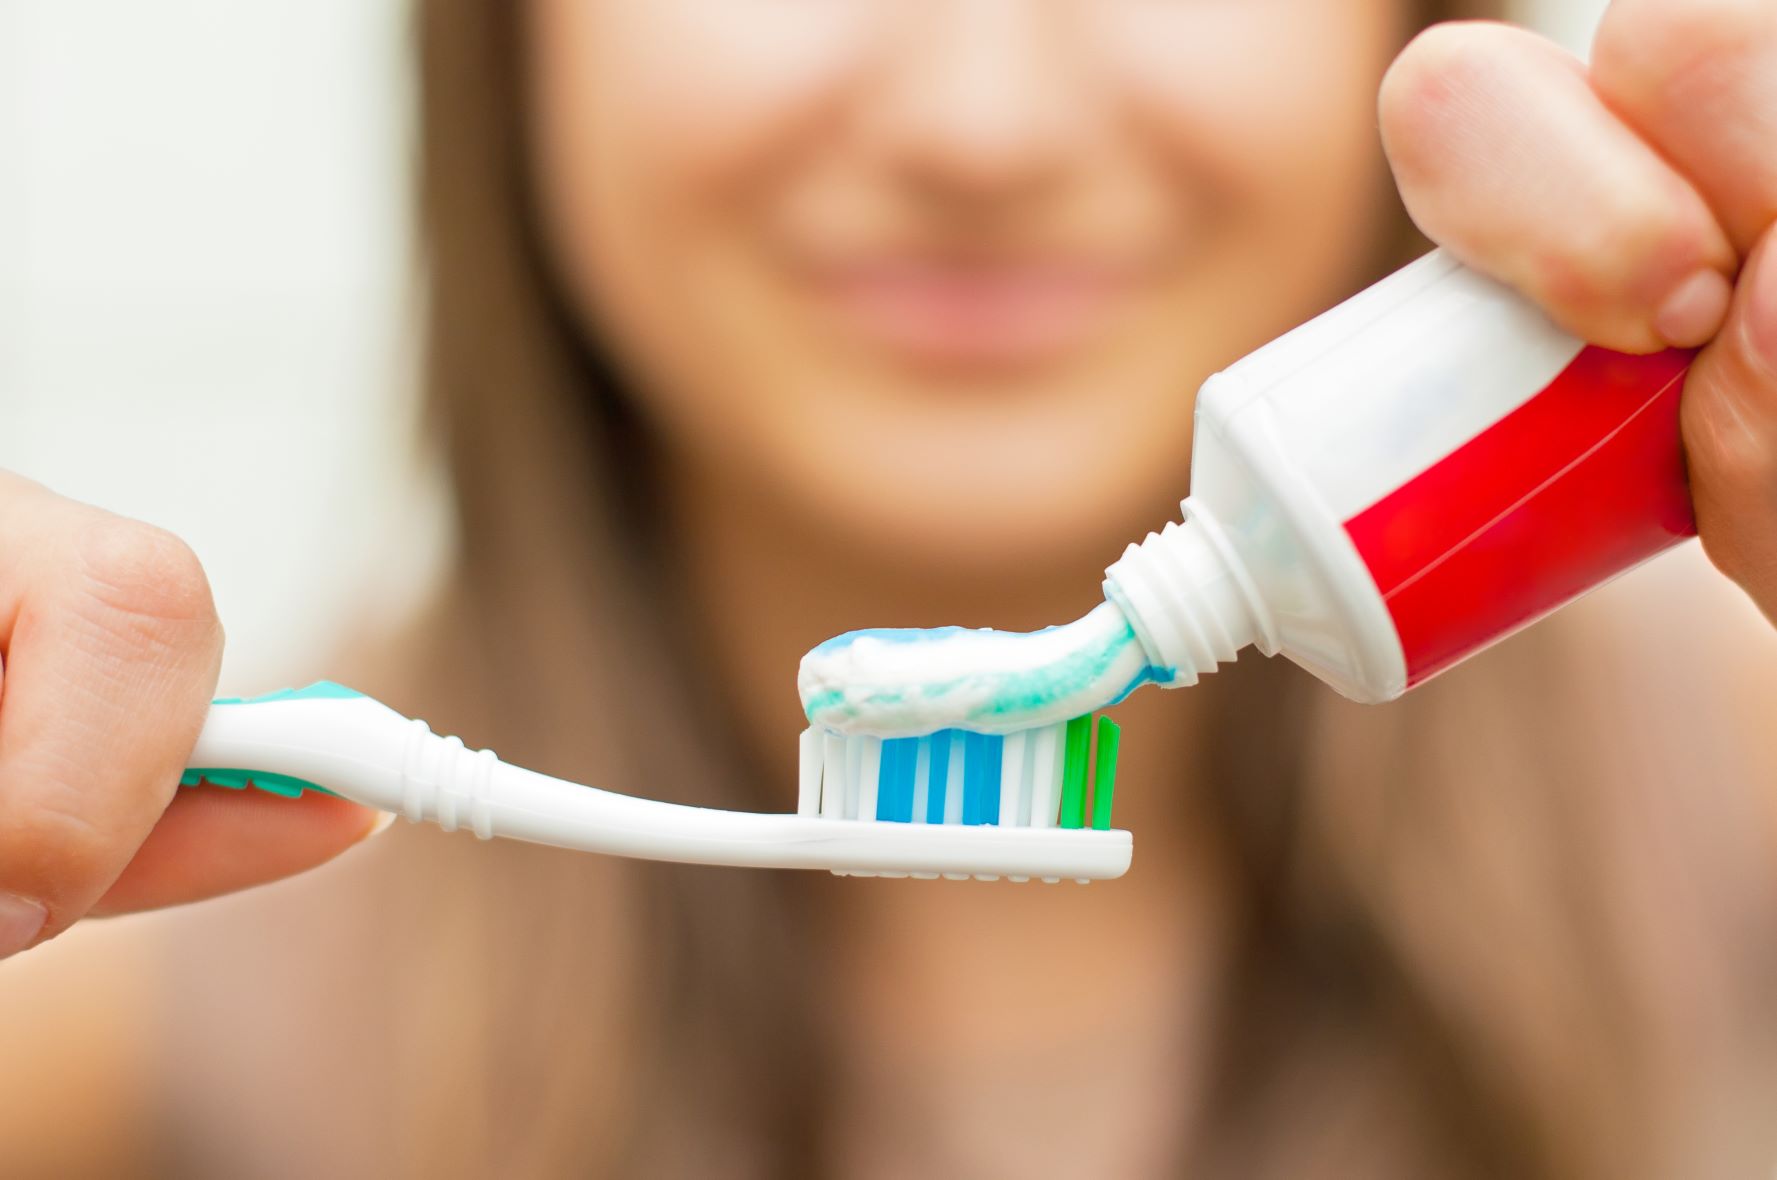 What You Can Do About Sensitive Teeth